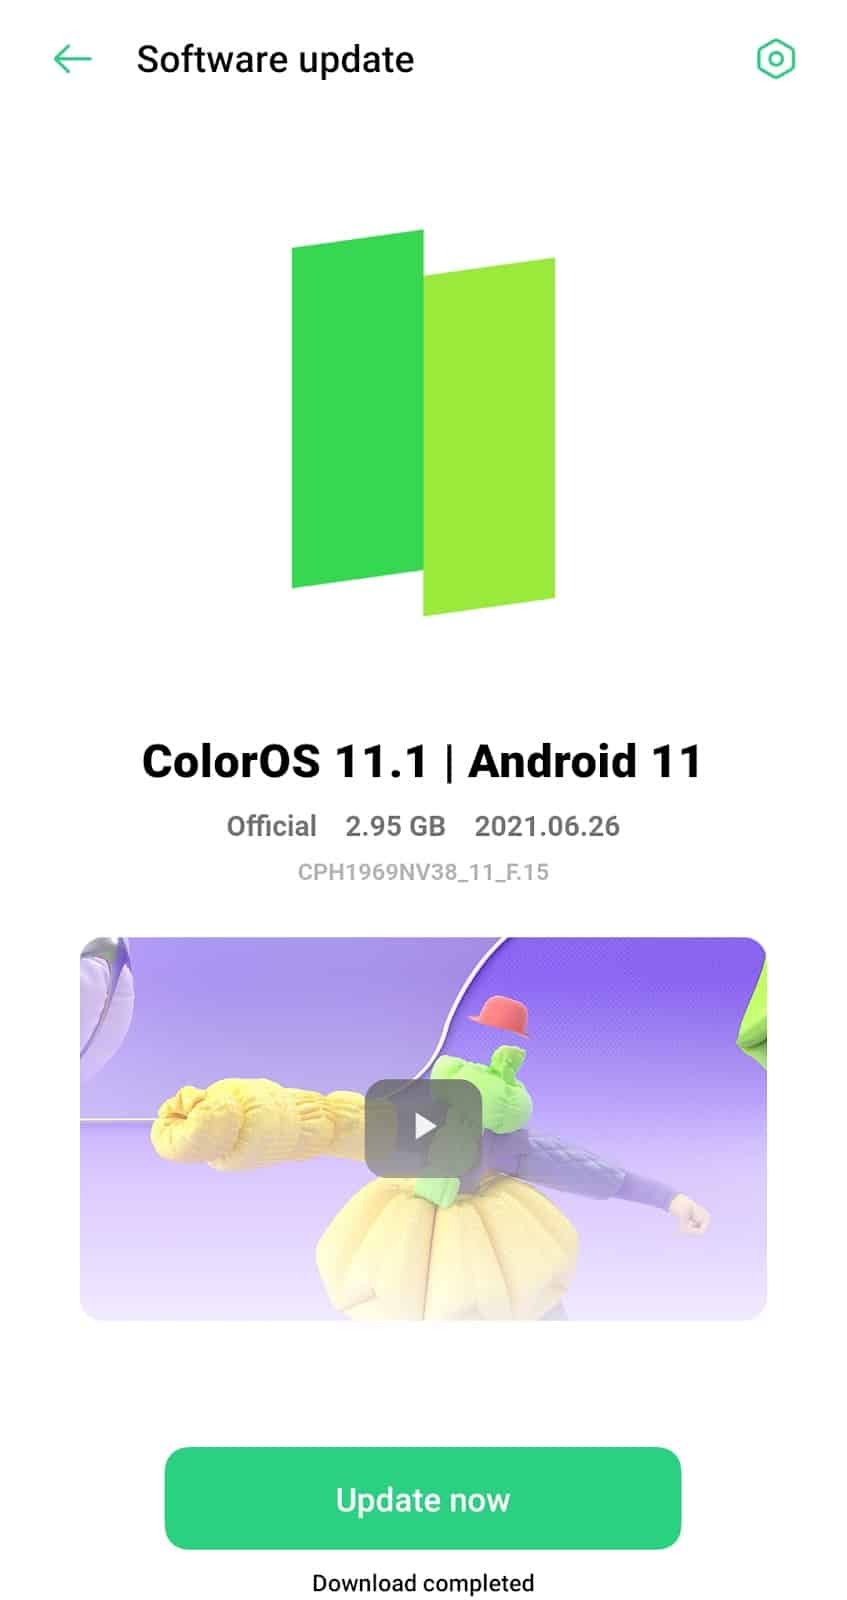 install pending OS updates for Android to fix YouTube "No Internet Connection", "Please Check Your Network Connection", "You're Offline" errors